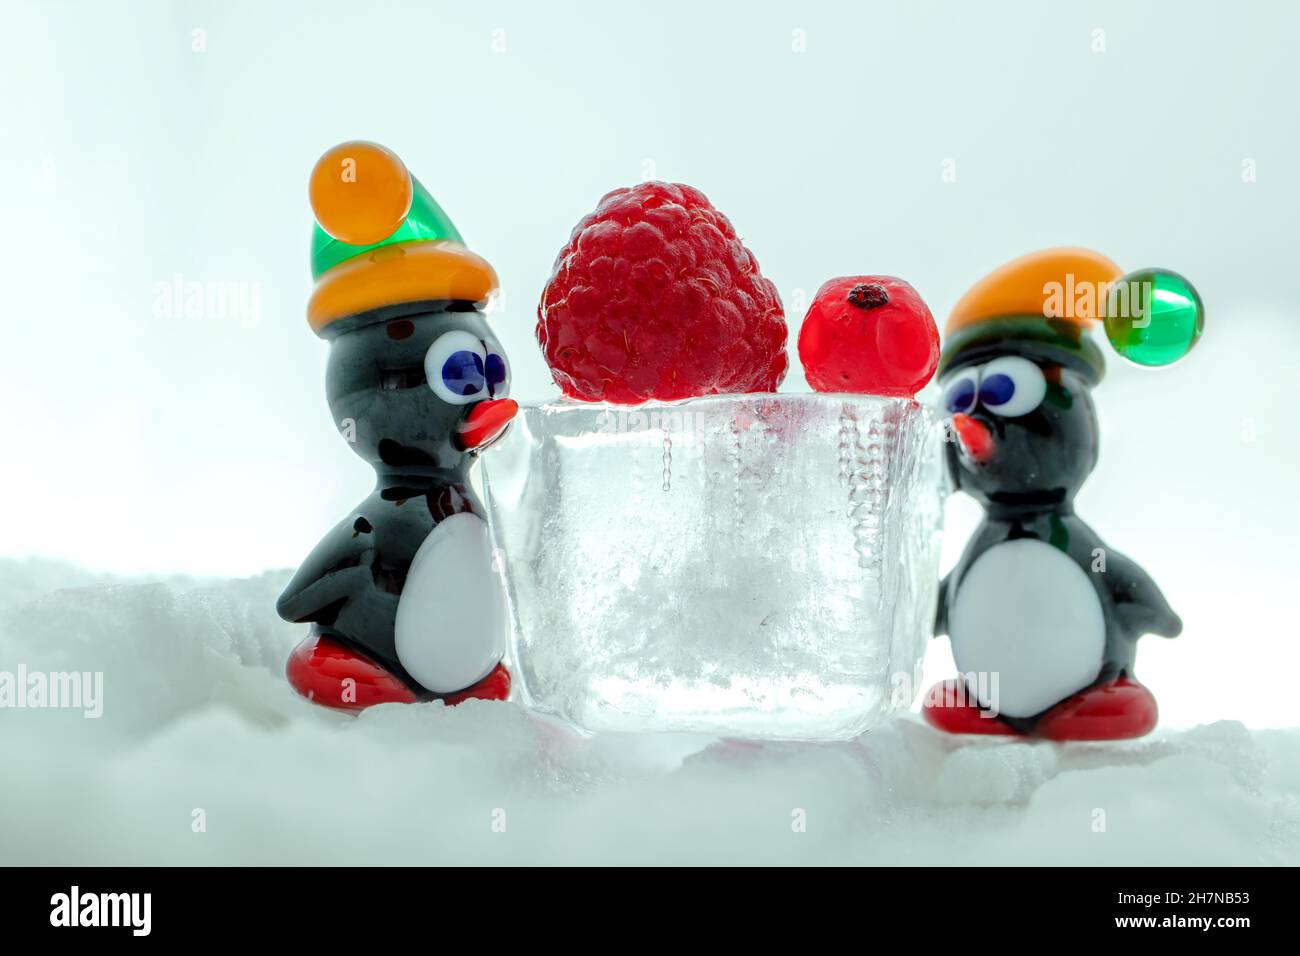 A pair of penguins made from Venetian glass in front of raspberry and red currant on the ice cube. Animal figurines made from Murano glass. Handmade. Stock Photo